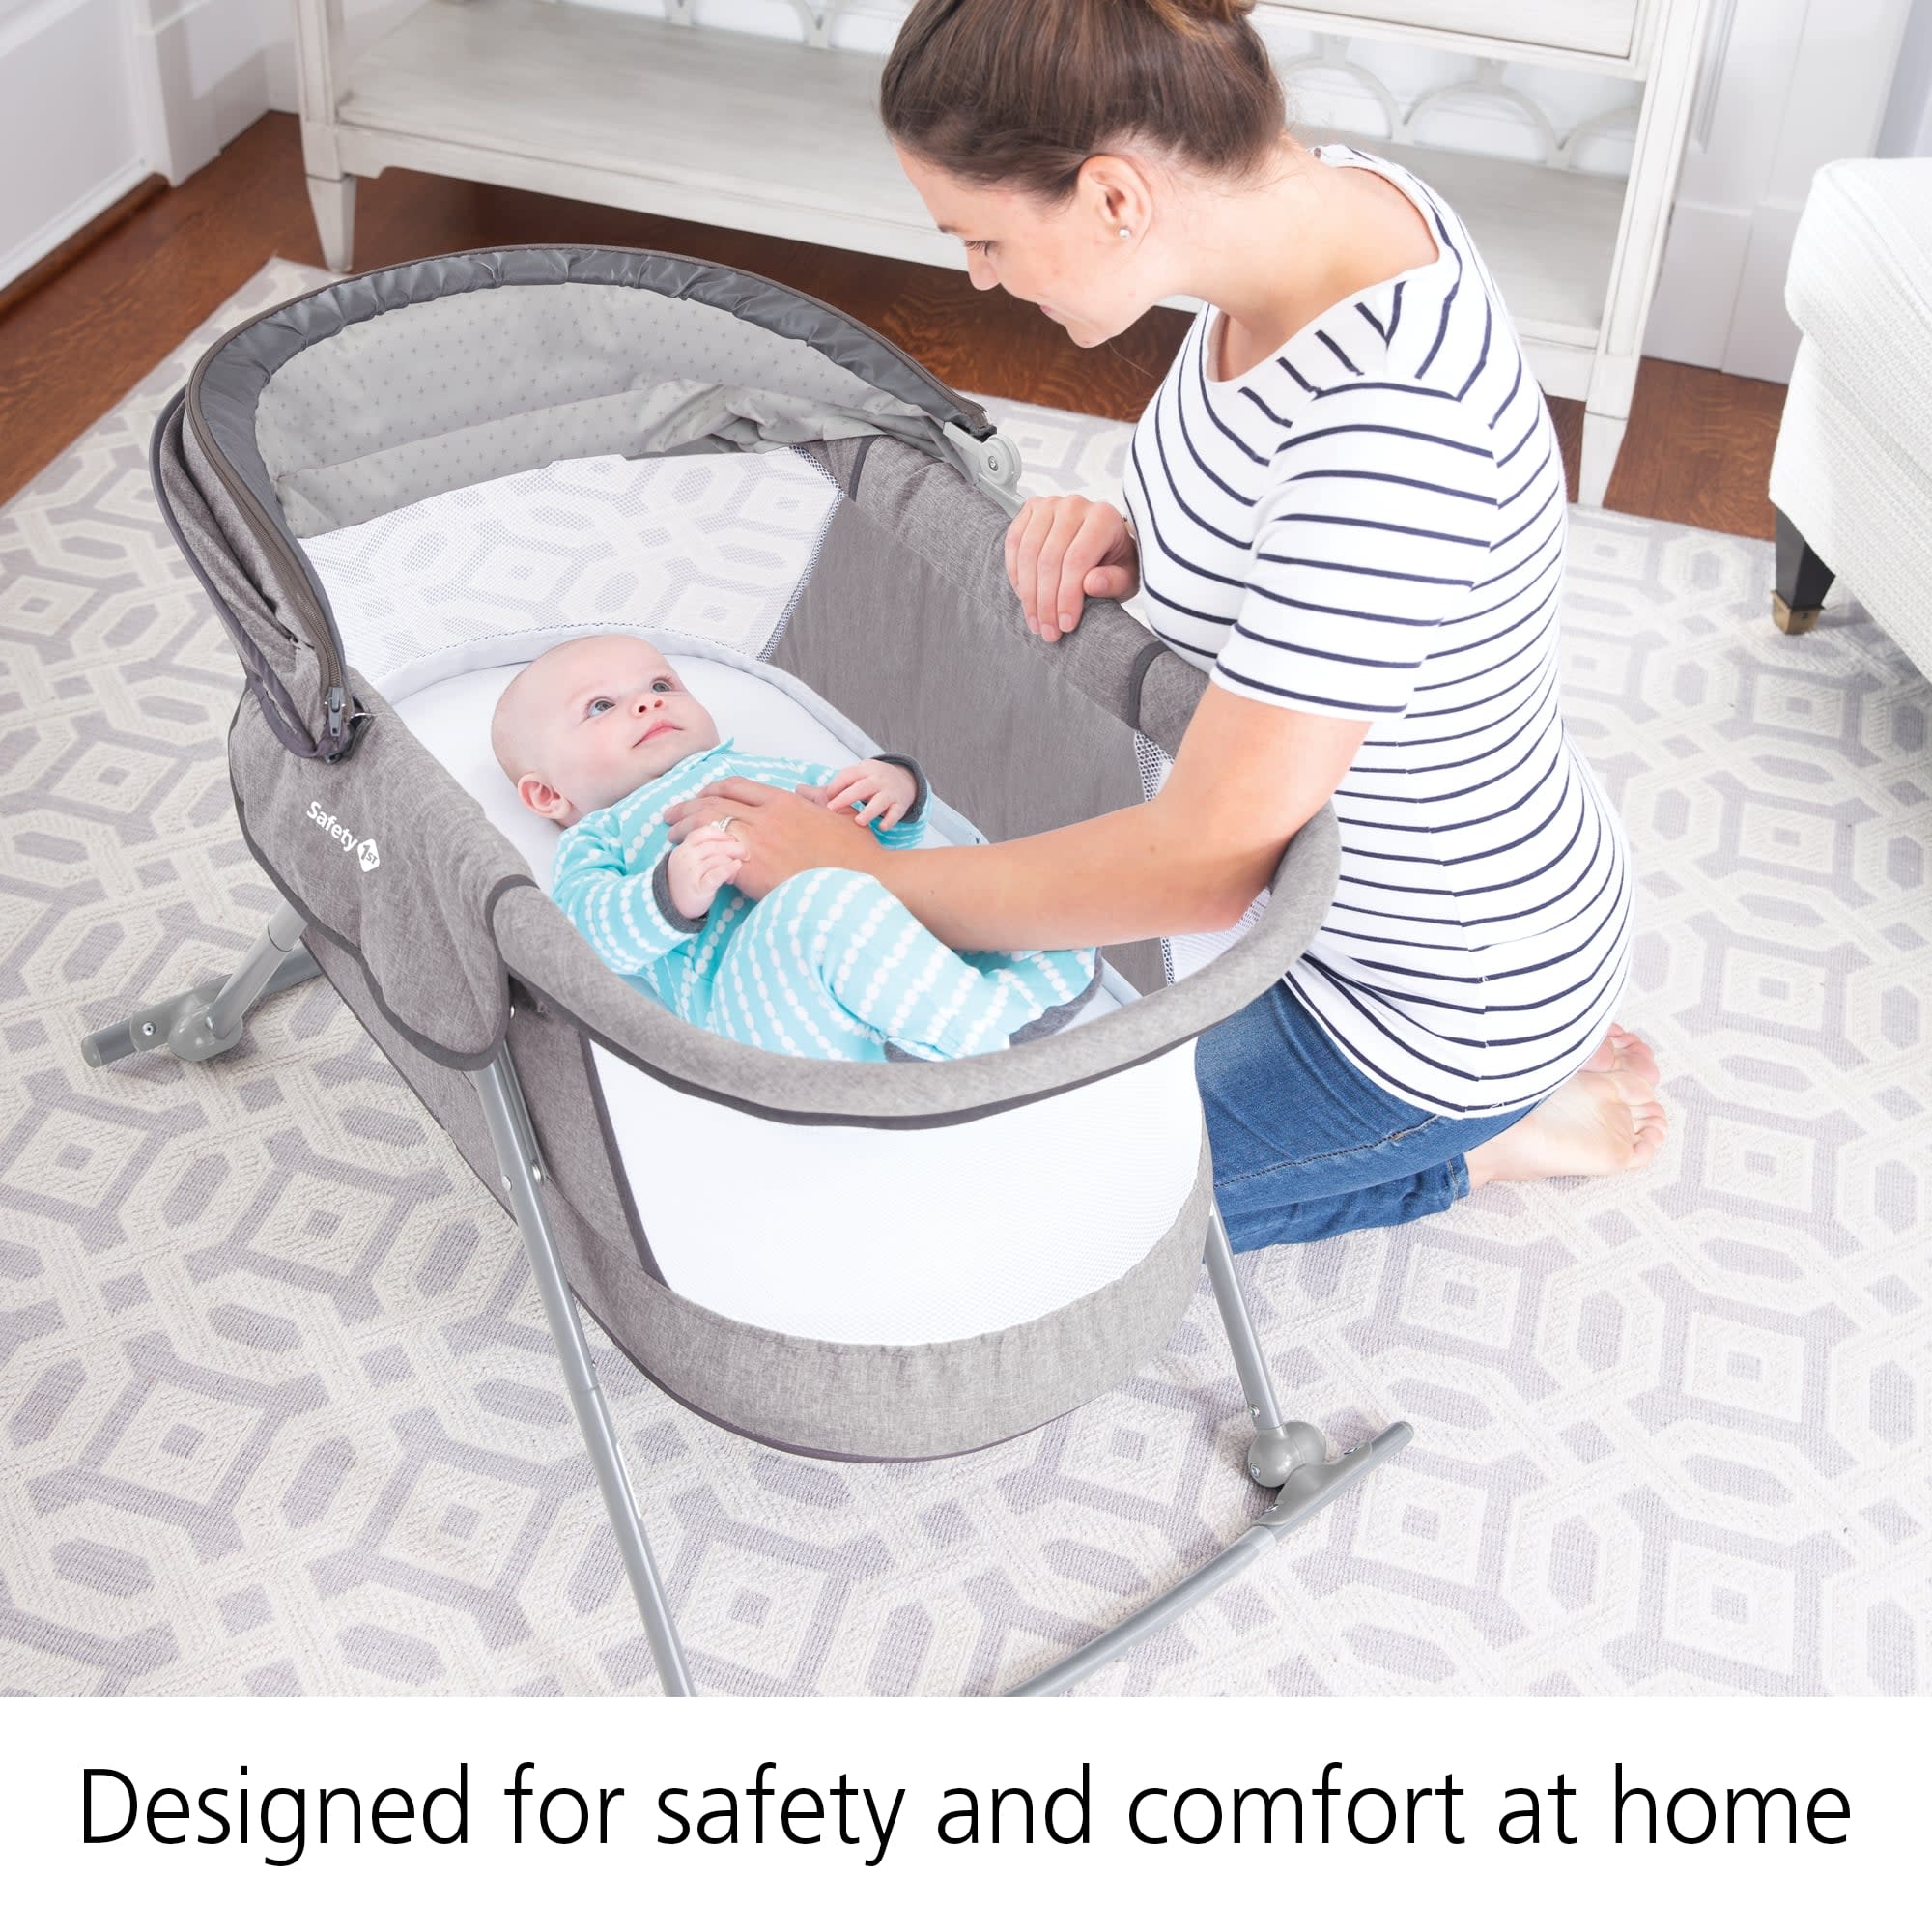 Parent with a baby in a nursery showing how the bassinet is designed for safety and comfort at home